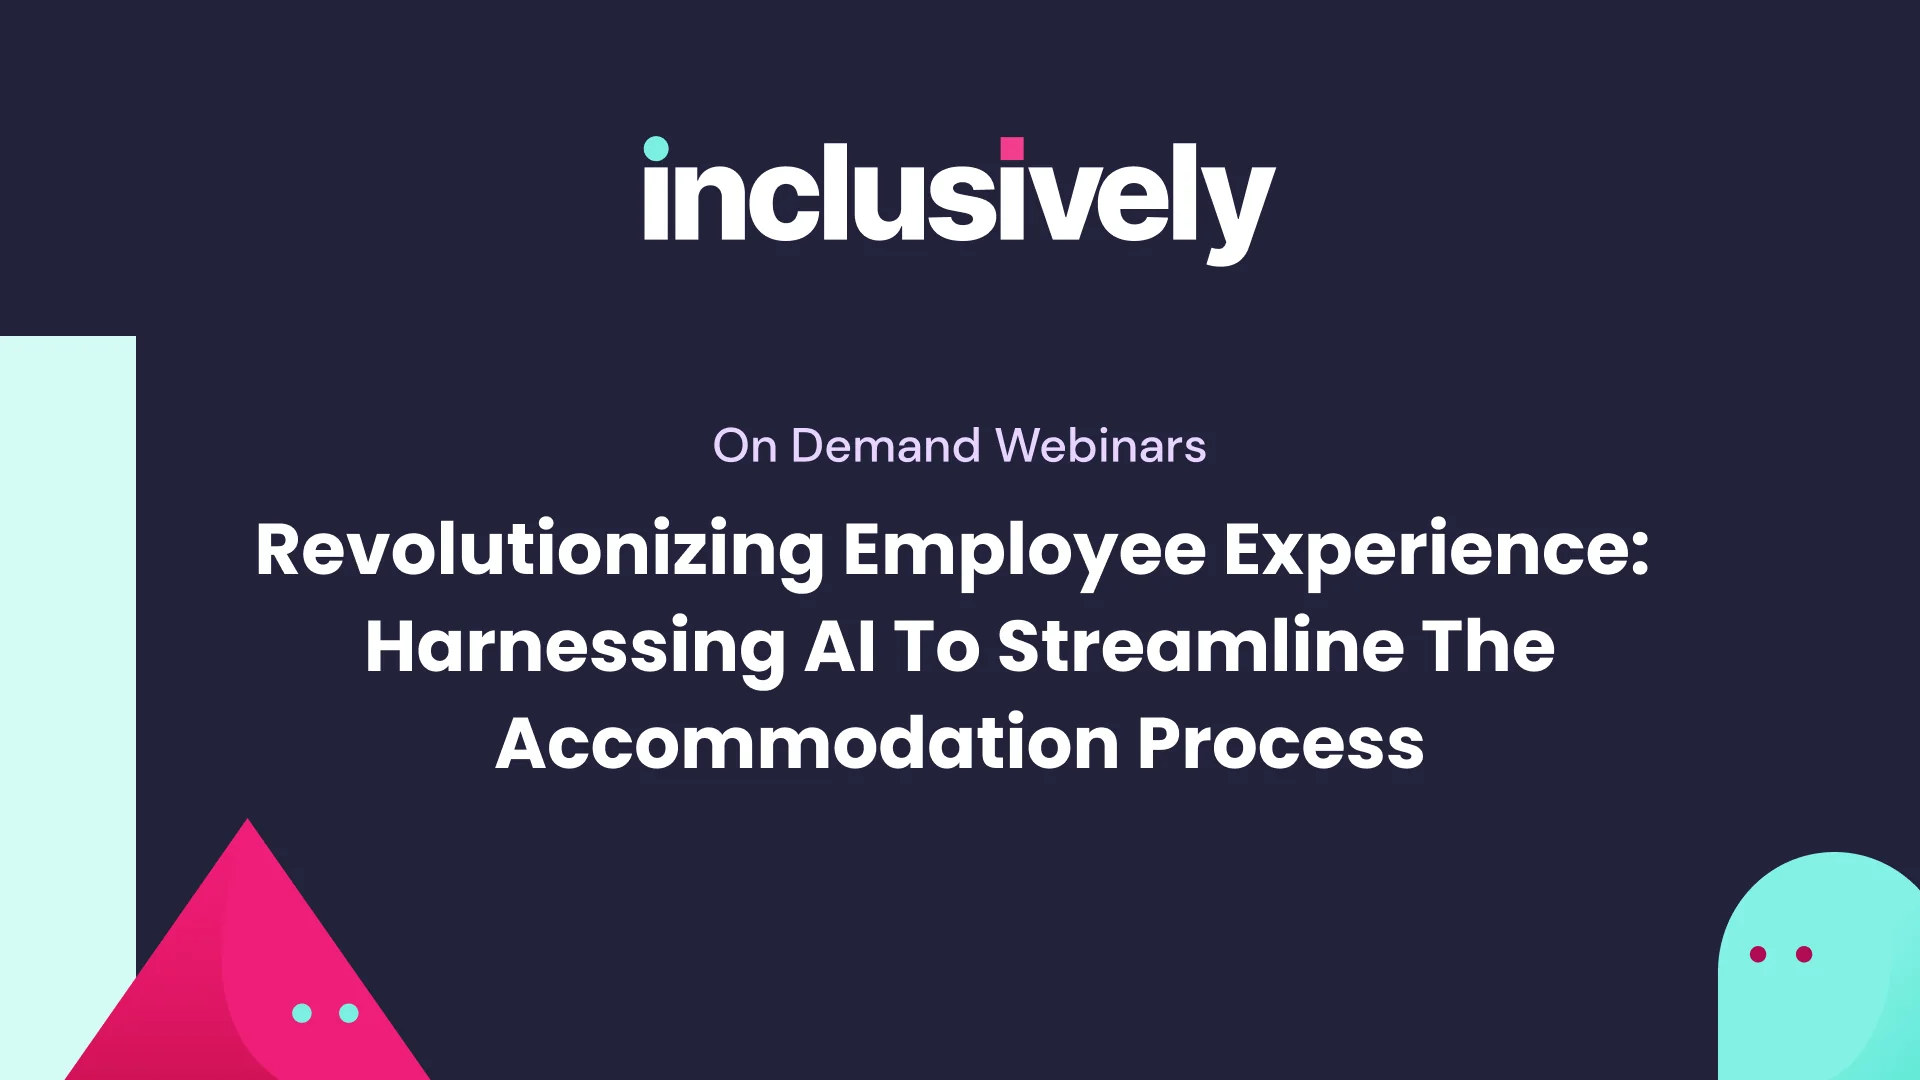 Revolutionizing Employee Experience: Harnessing AI to Streamline the Accommodation Process